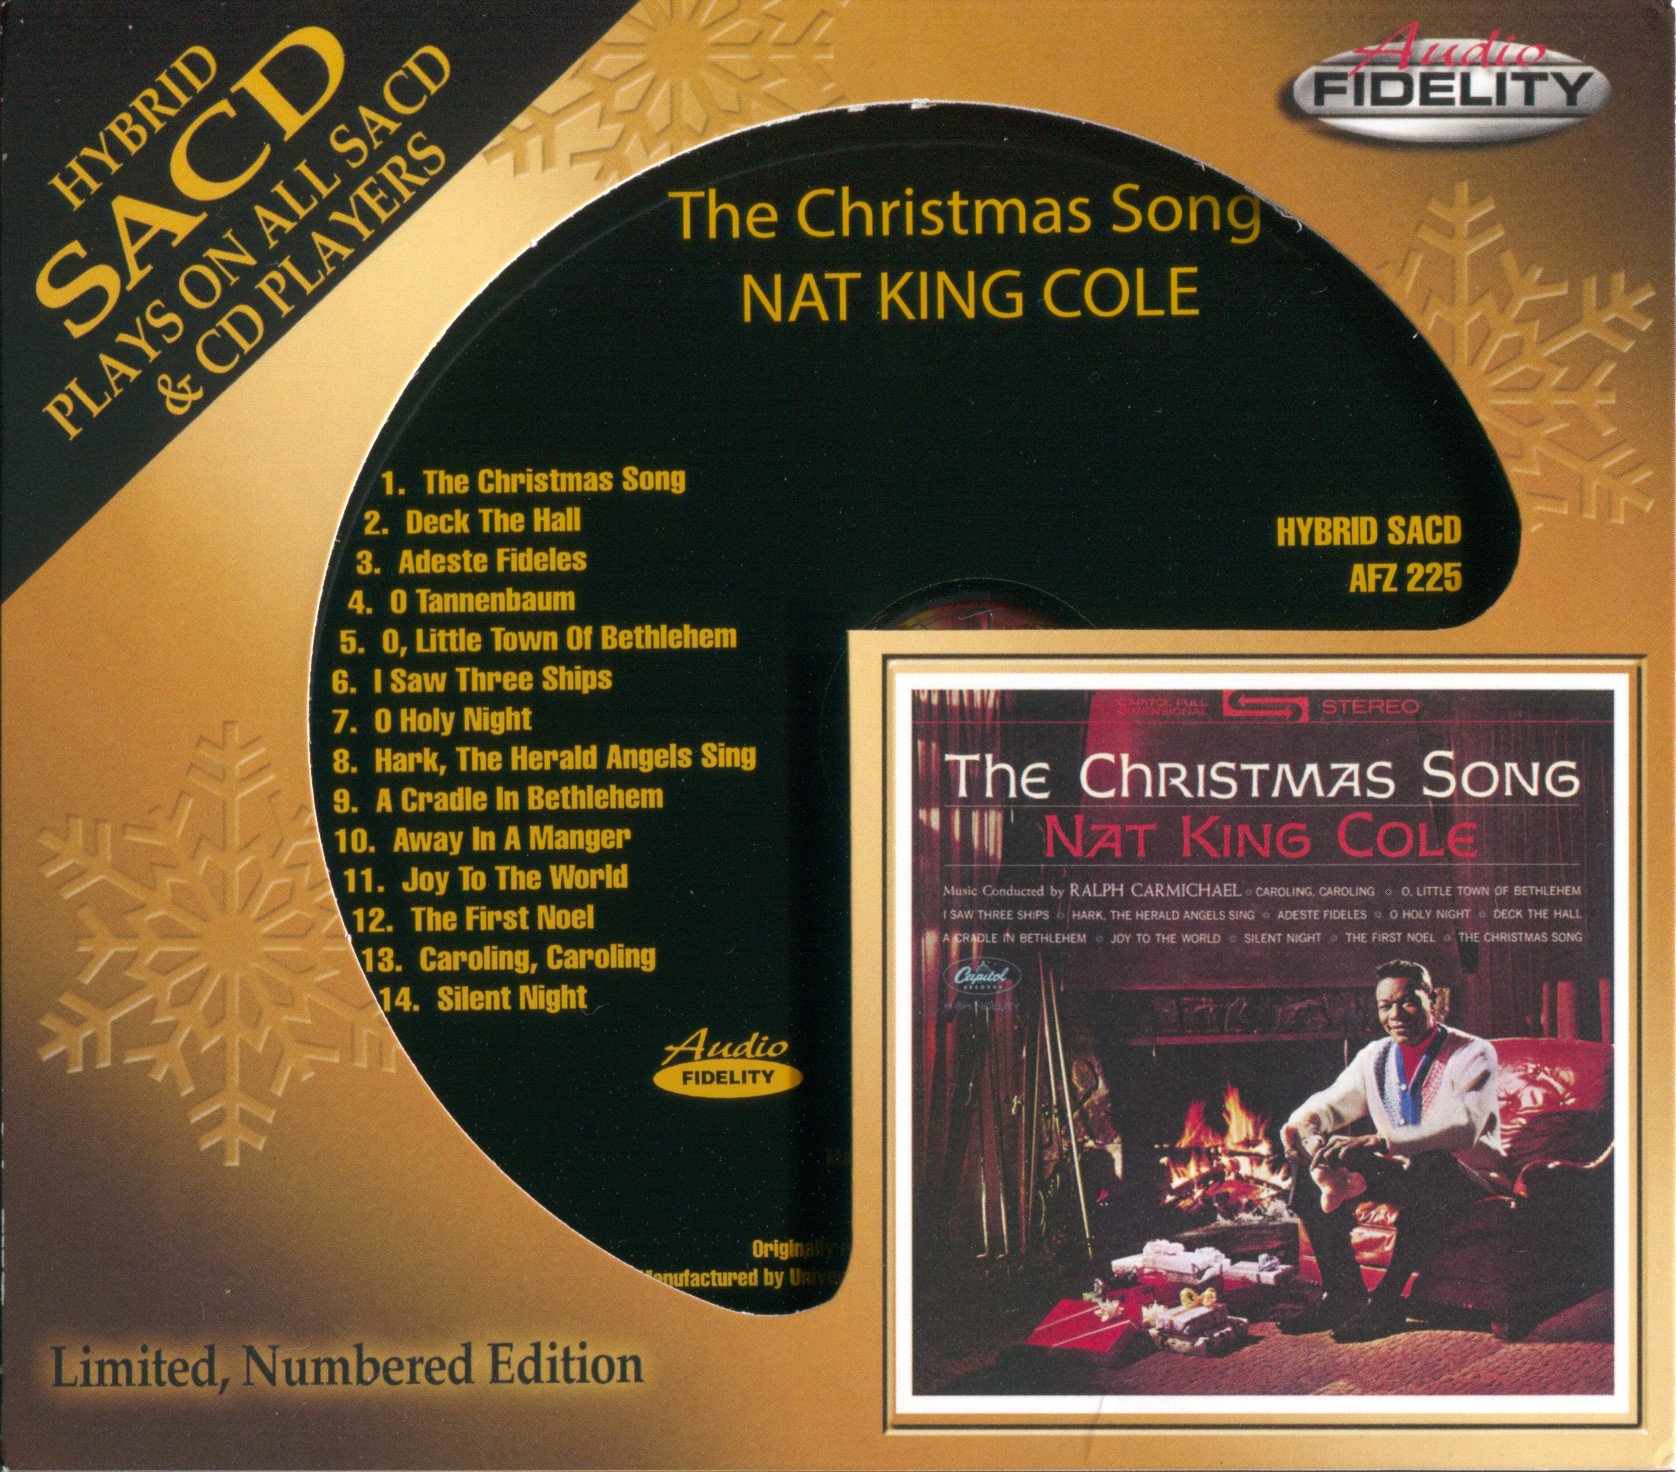 Download Nat King Cole - The Christmas Song (Limited edition) - 1962/2015 SACD-ROF - SoftArchive